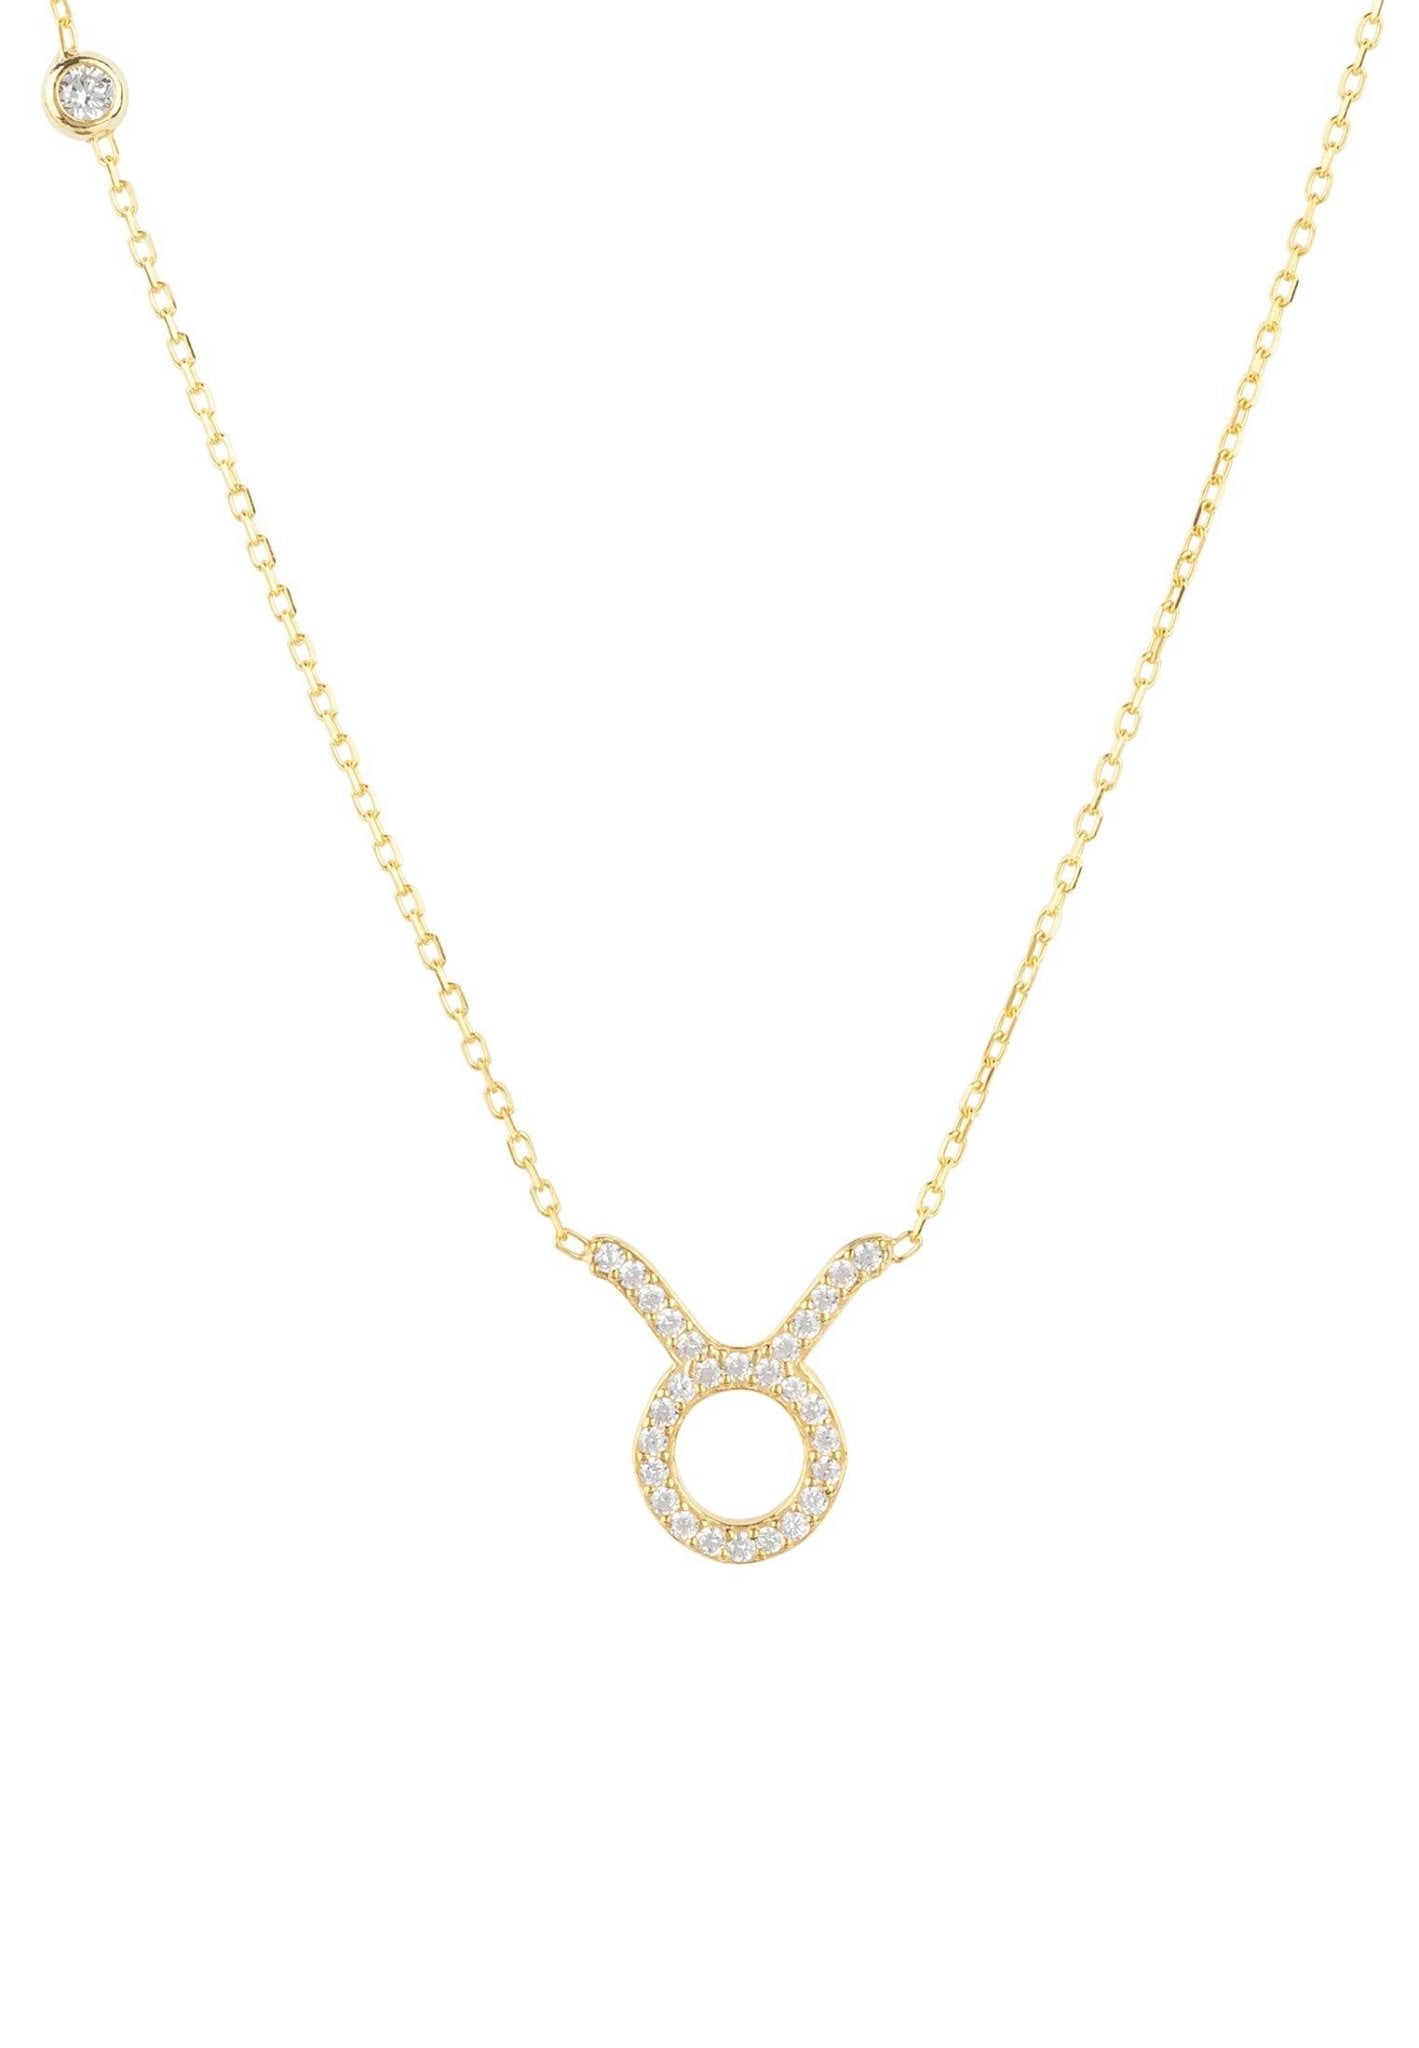 TAURUS Necklace-Gold Plated - EliPot